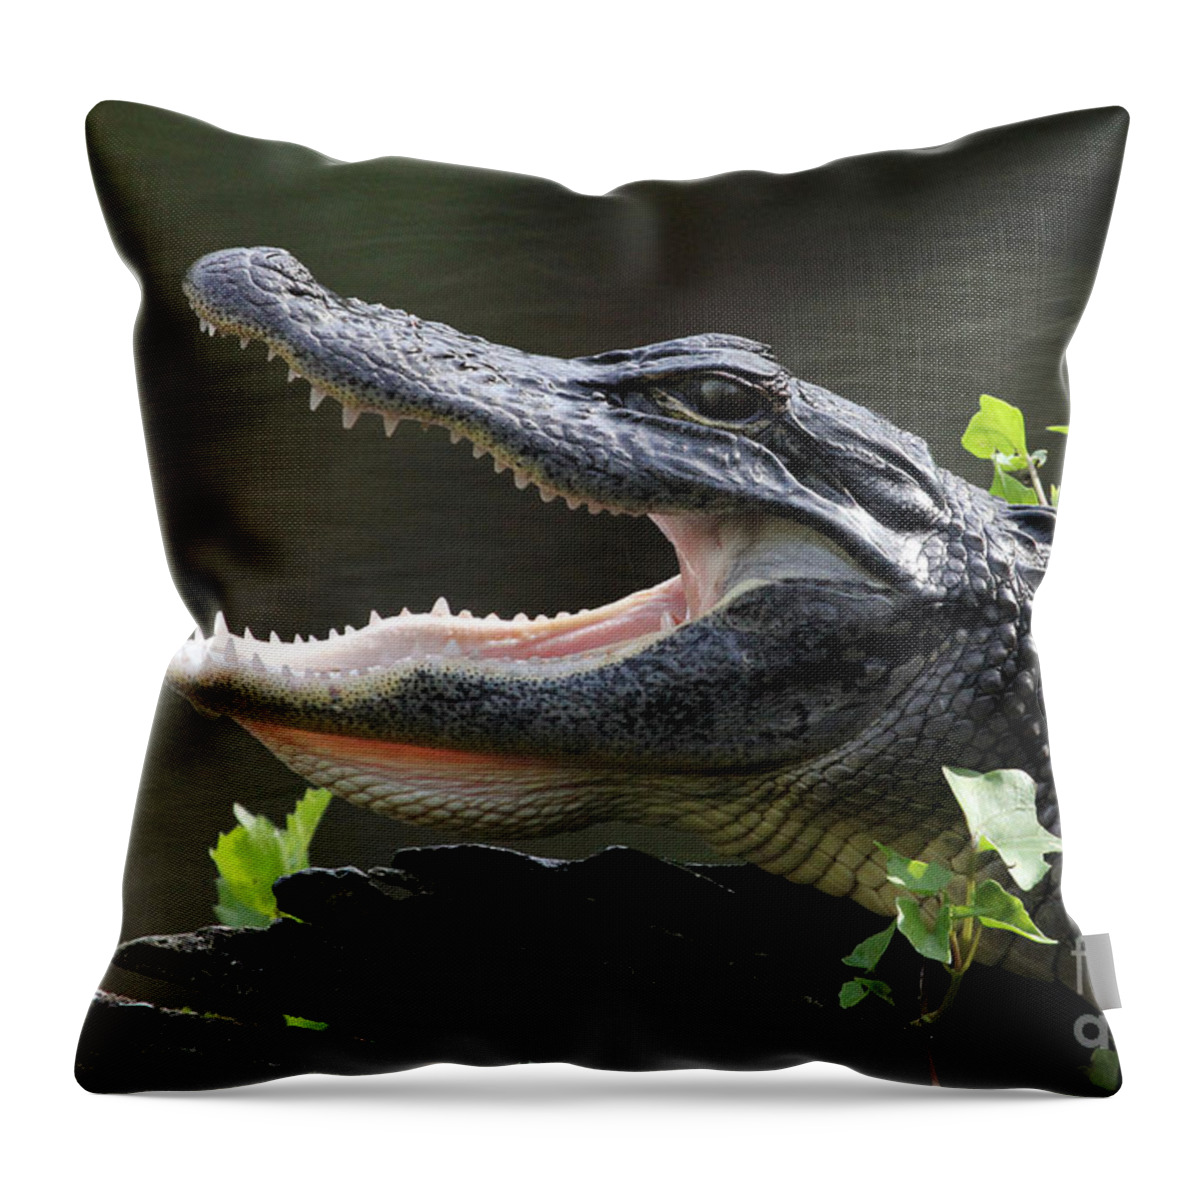 American Alligator Throw Pillow featuring the photograph Say Aah - American Alligator by Meg Rousher